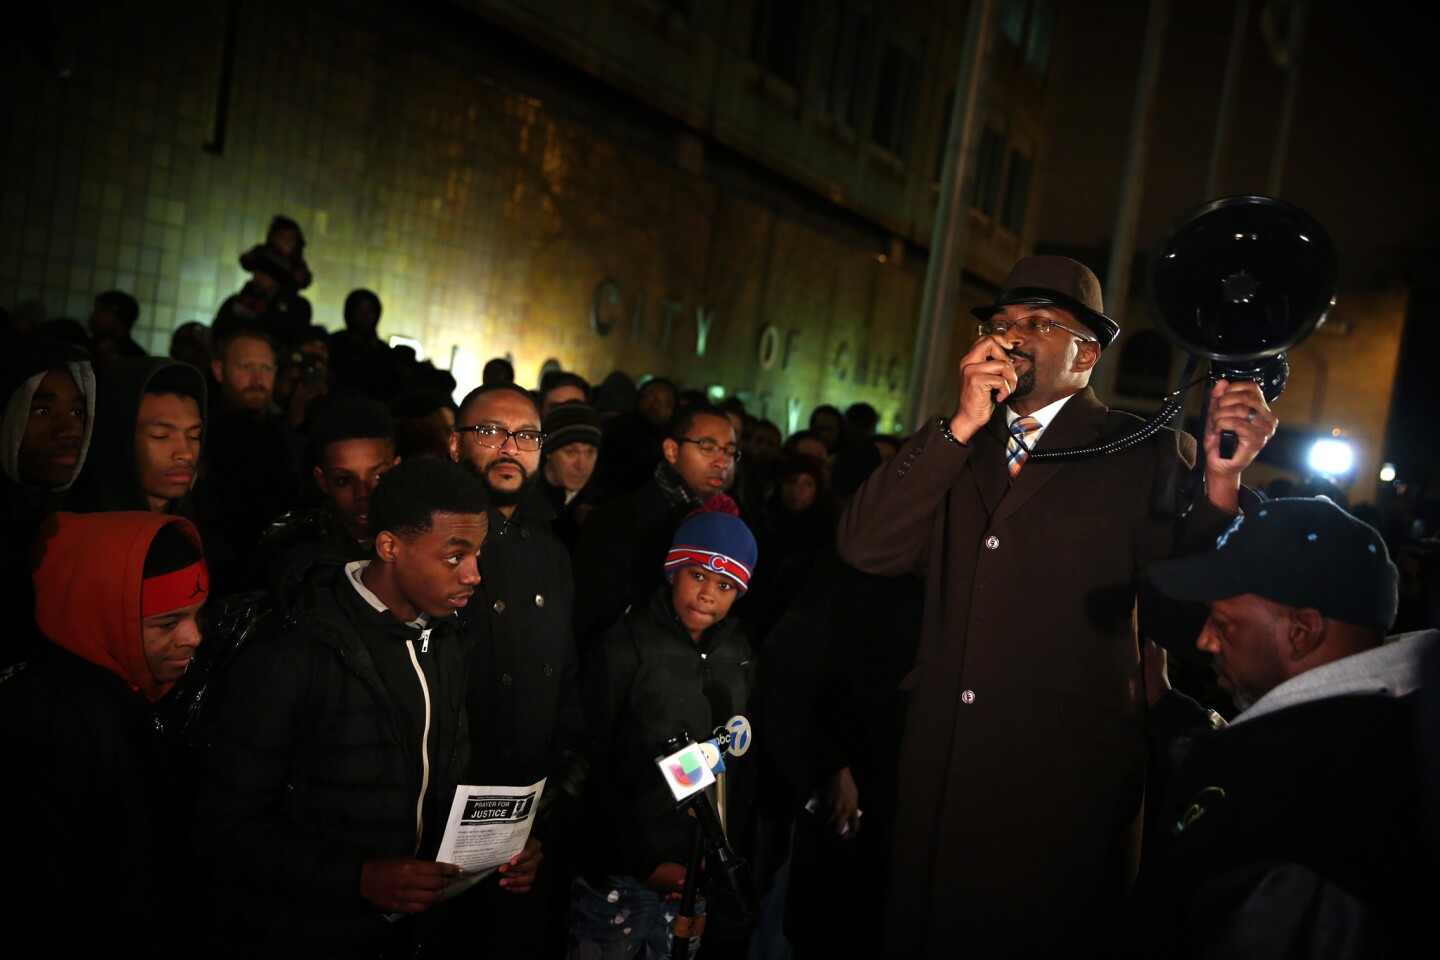 A prayer vigil is held in front of the Chicago Police Department headquarters in memory of Laquan McDonald and to call for a federal investigation into the case, Nov. 30, 2015.